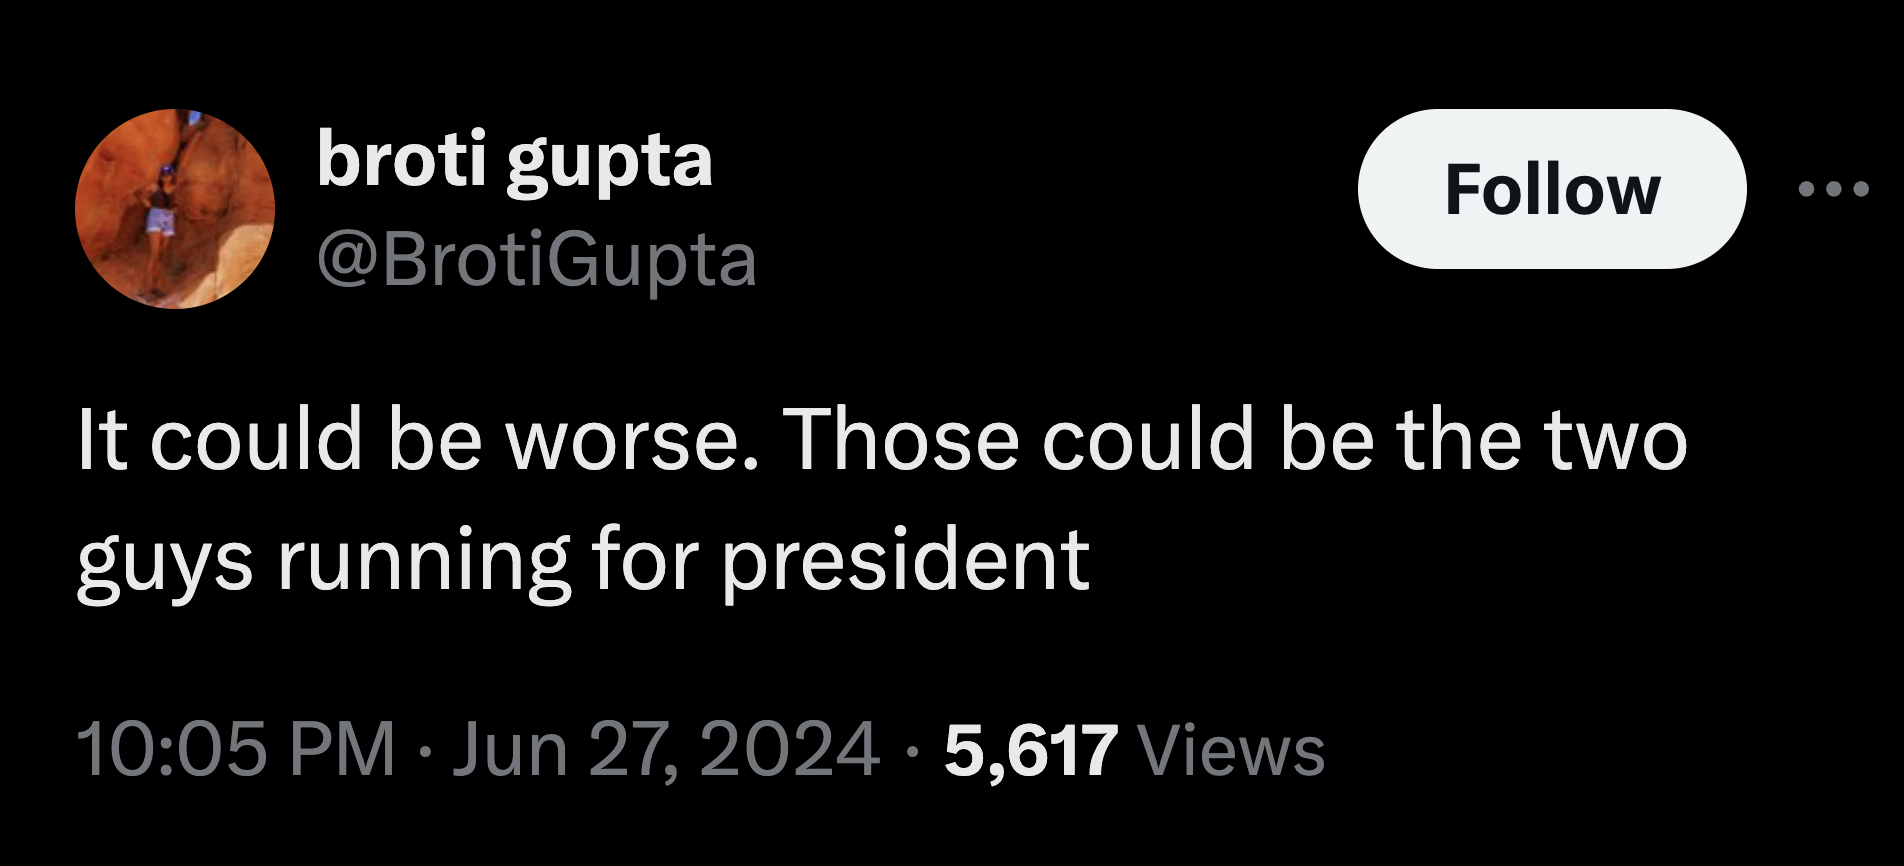 lunar eclipse - broti gupta It could be worse. Those could be the two guys running for president 5,617 Views